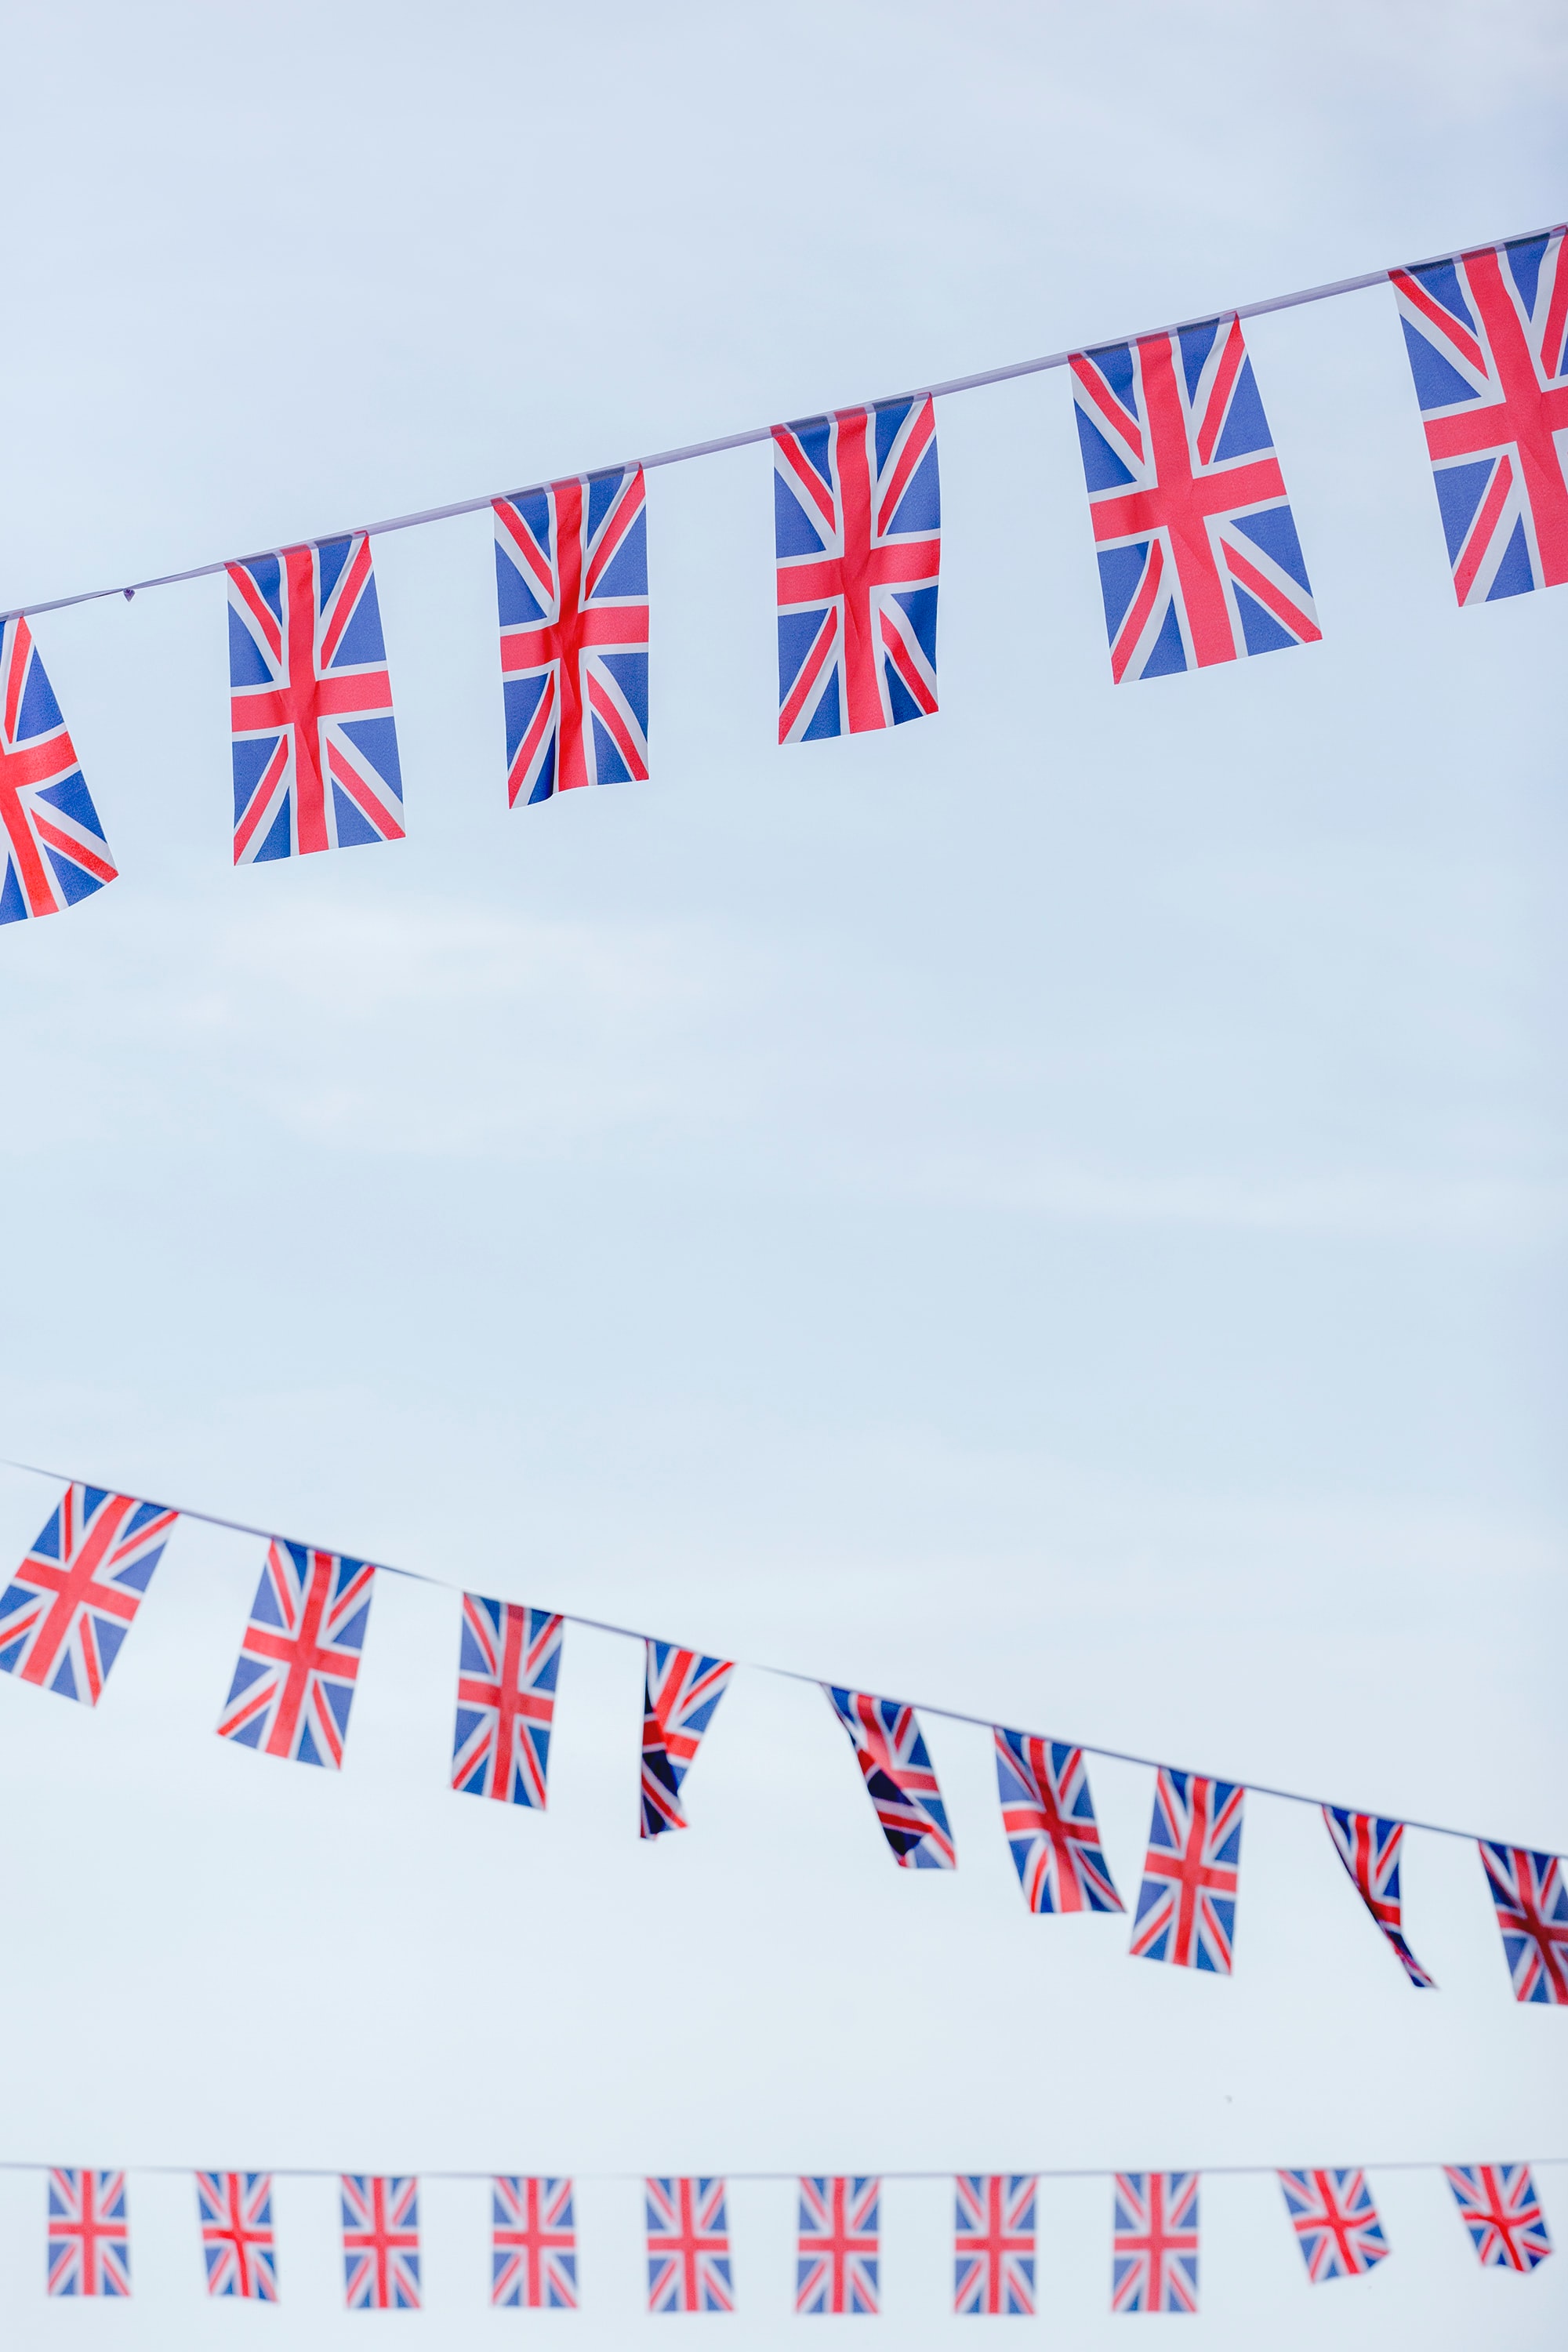 British flags as bunting to celebrate the Royal family